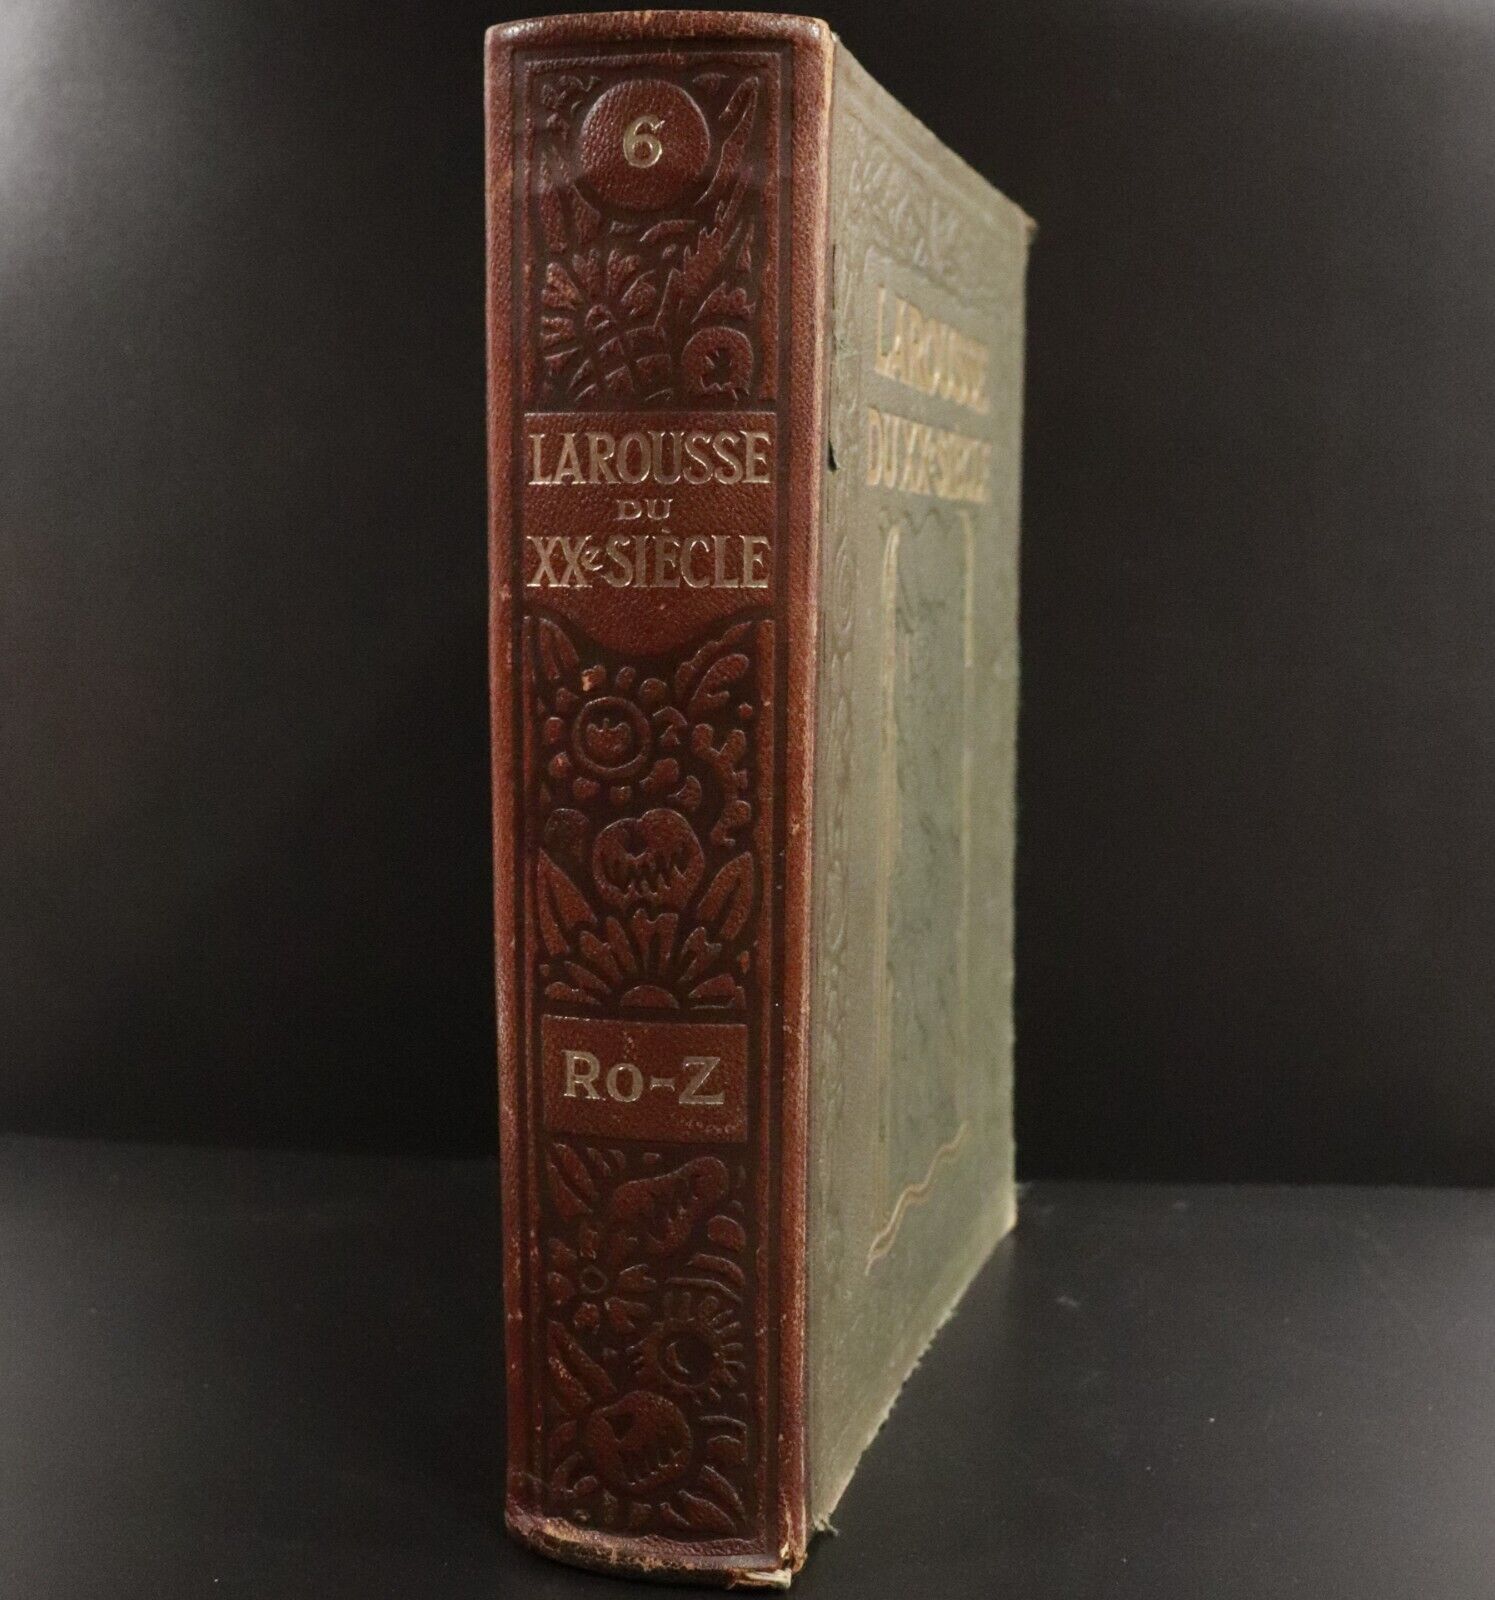 1933 Larousse Du Xxe Siecle Vol.6 by Paul Auge' French Reference Book